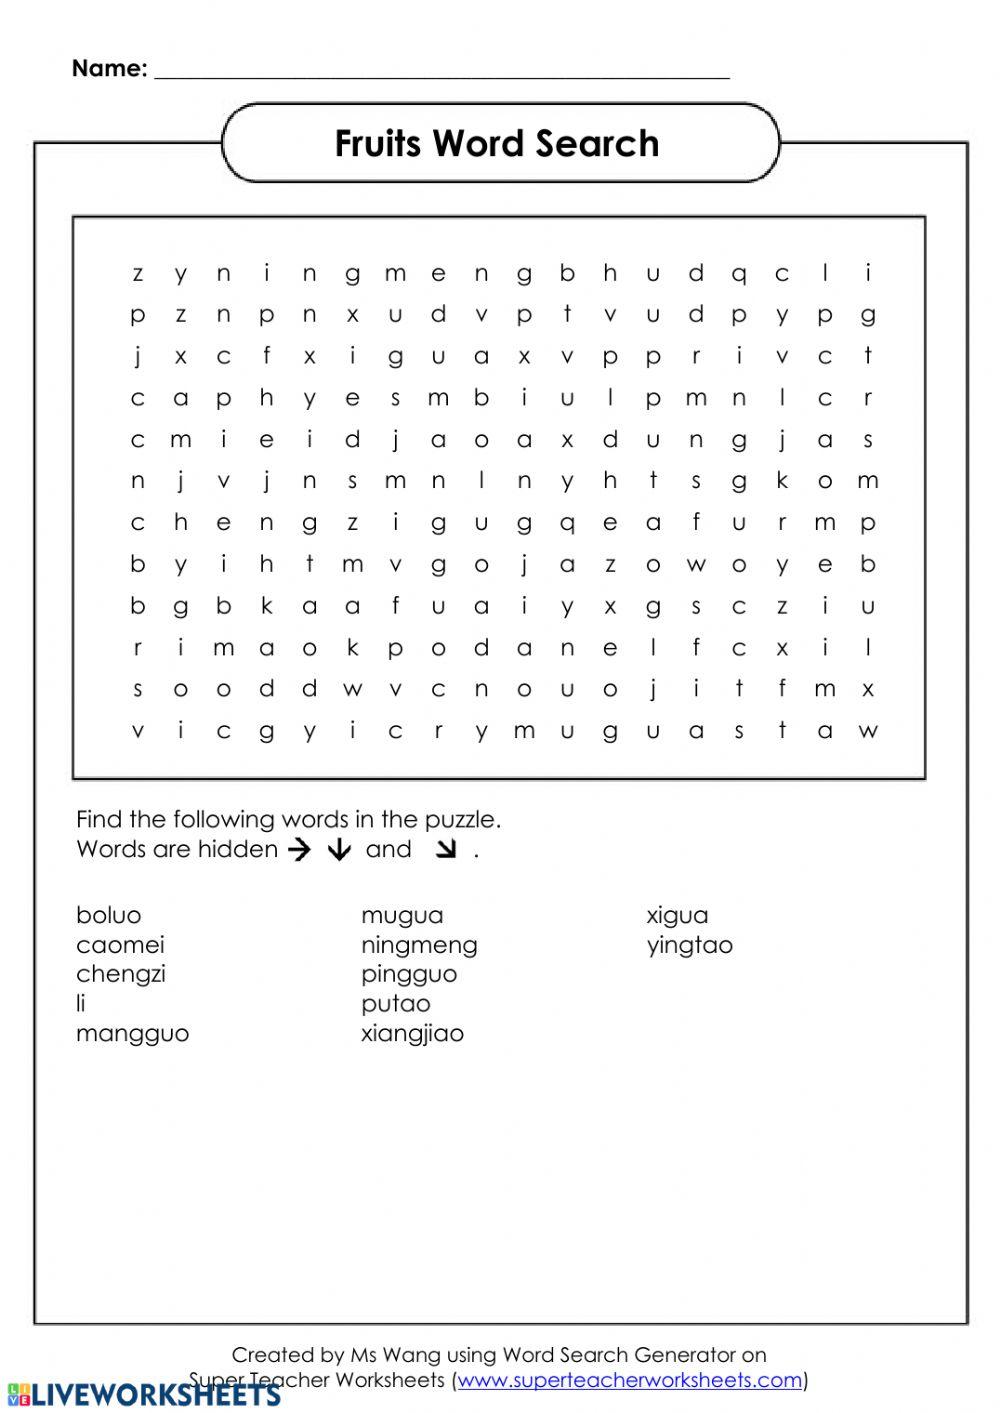 Fruits word search